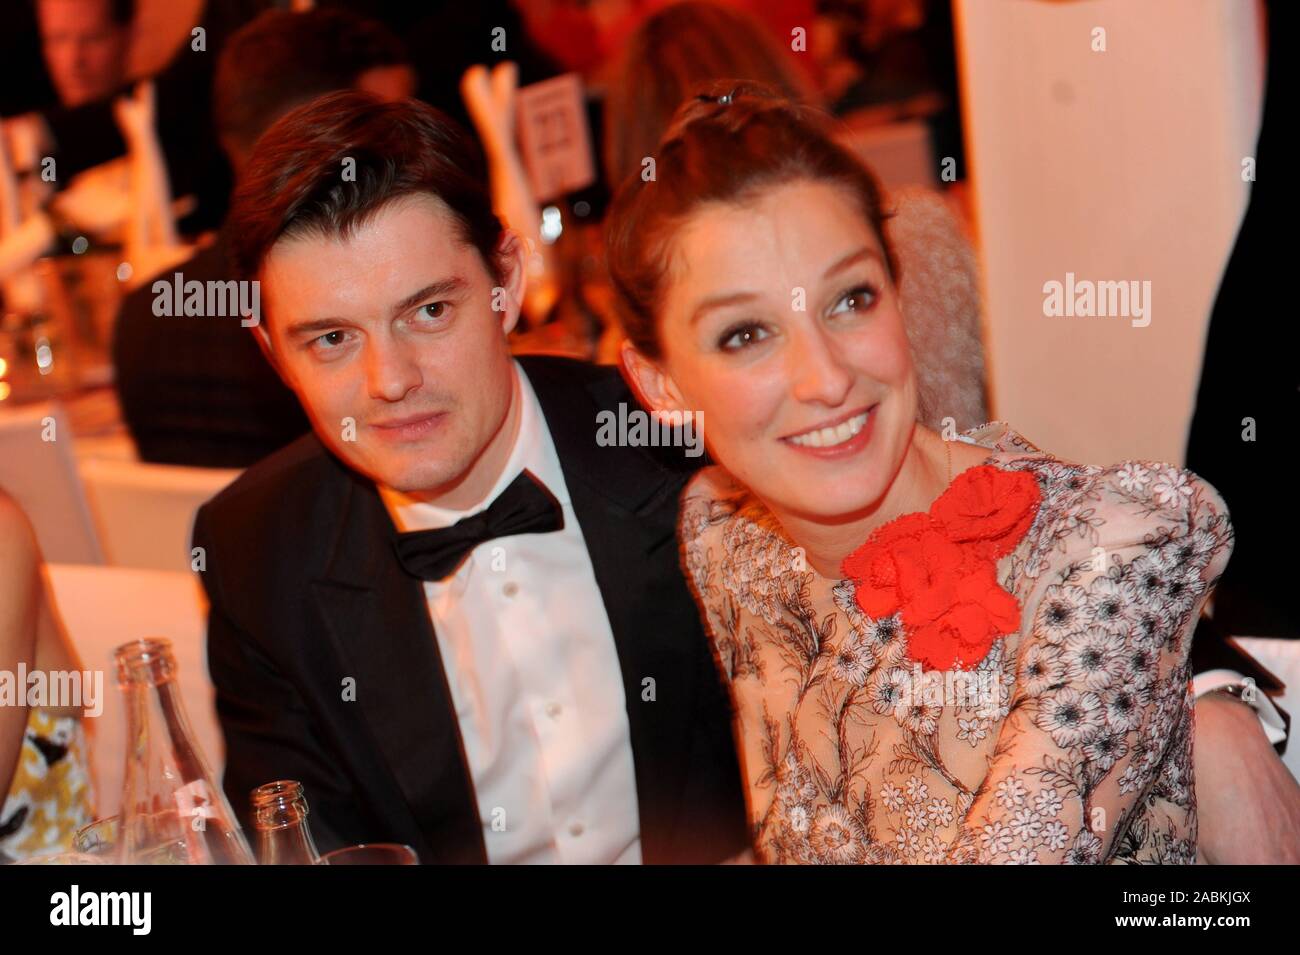 Sam Riley and Alexandra Maria Lara at the 46th German Film Ball at the Hotel Bayerischer Hof in Munich. [automated translation] Stock Photo